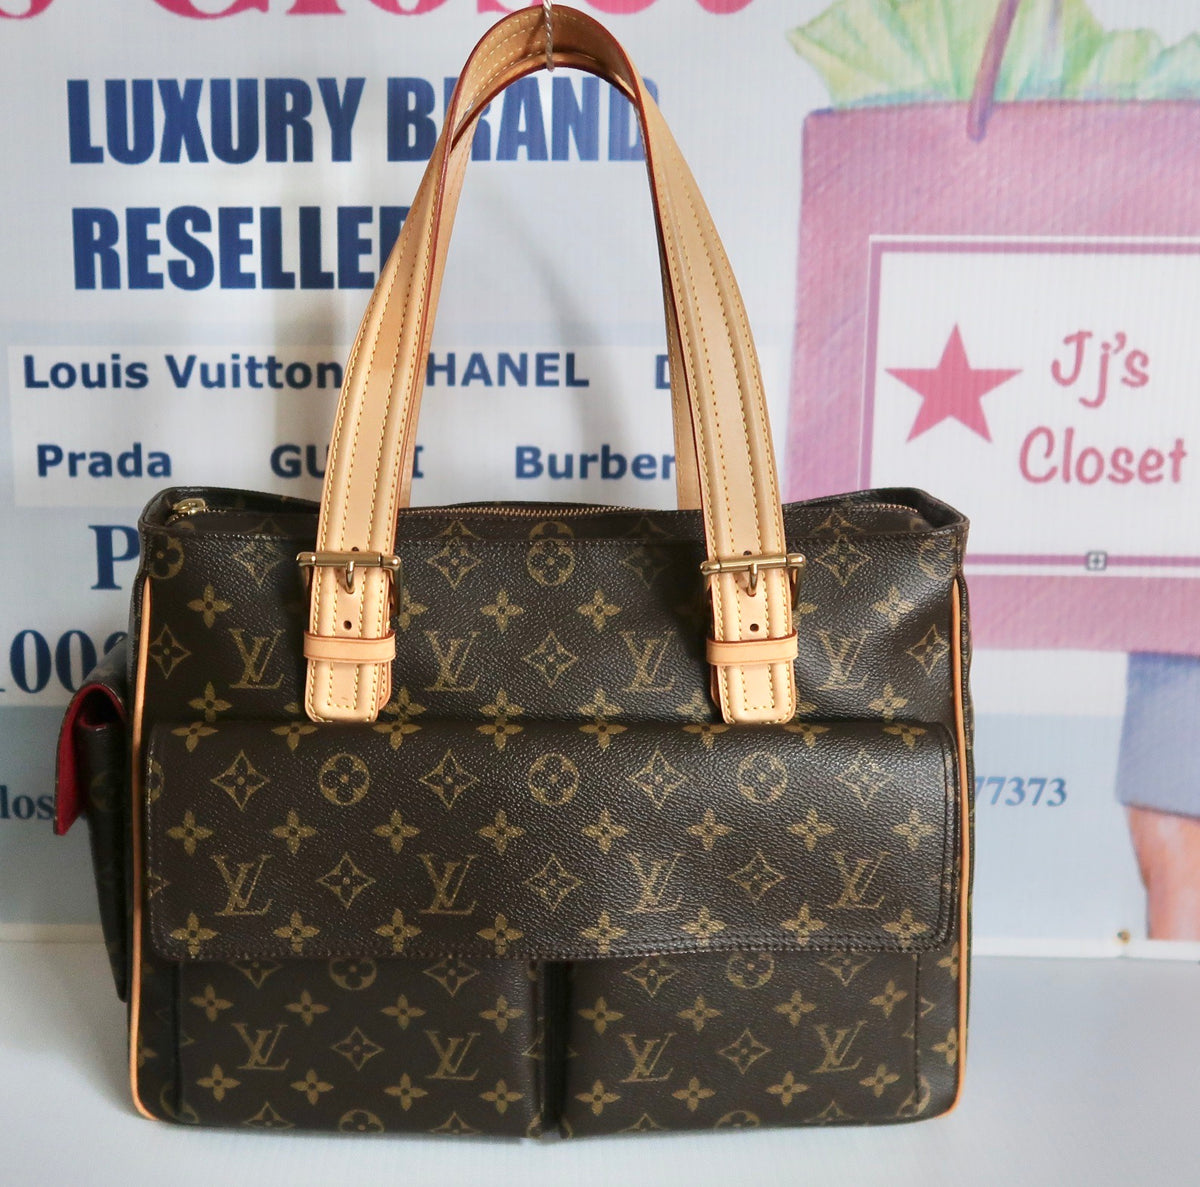 SOLD OUT - Louis Vuitton Multipli Cite Free Shipping Worldwide